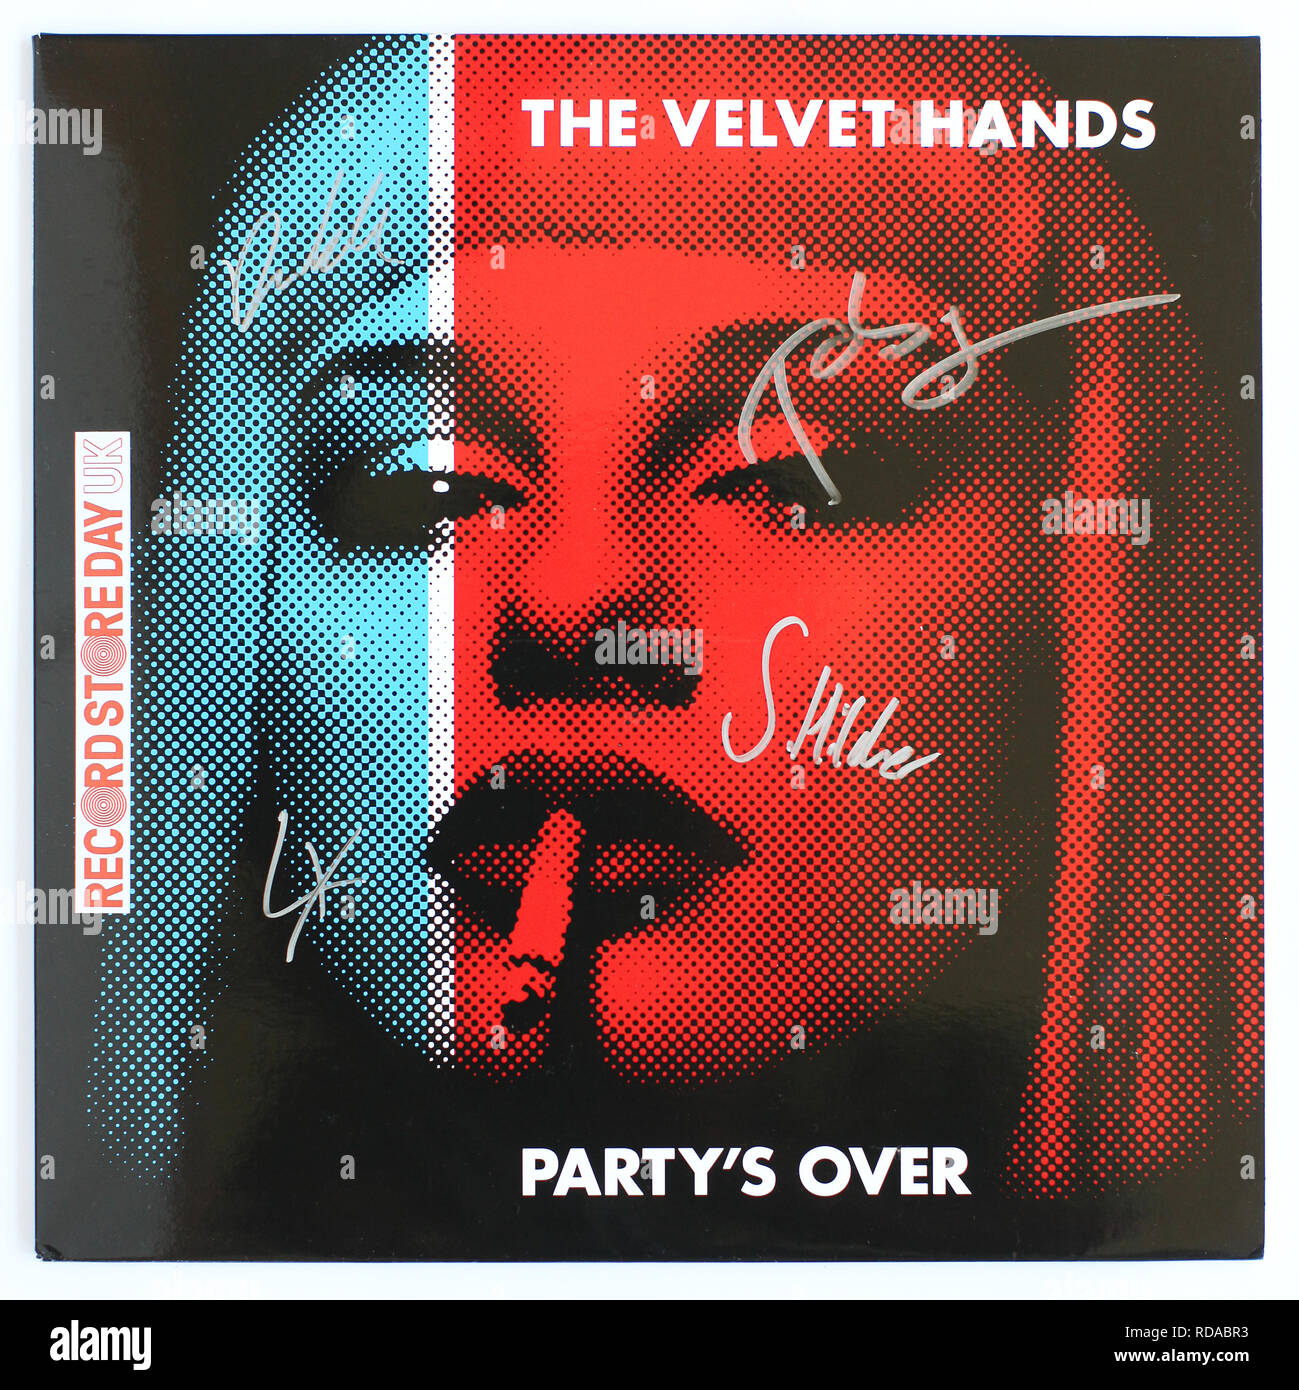 The cover of Party’s Over by The Velvet Hands. 2017 debut album on Easy Action Records - Editorial use only Stock Photo